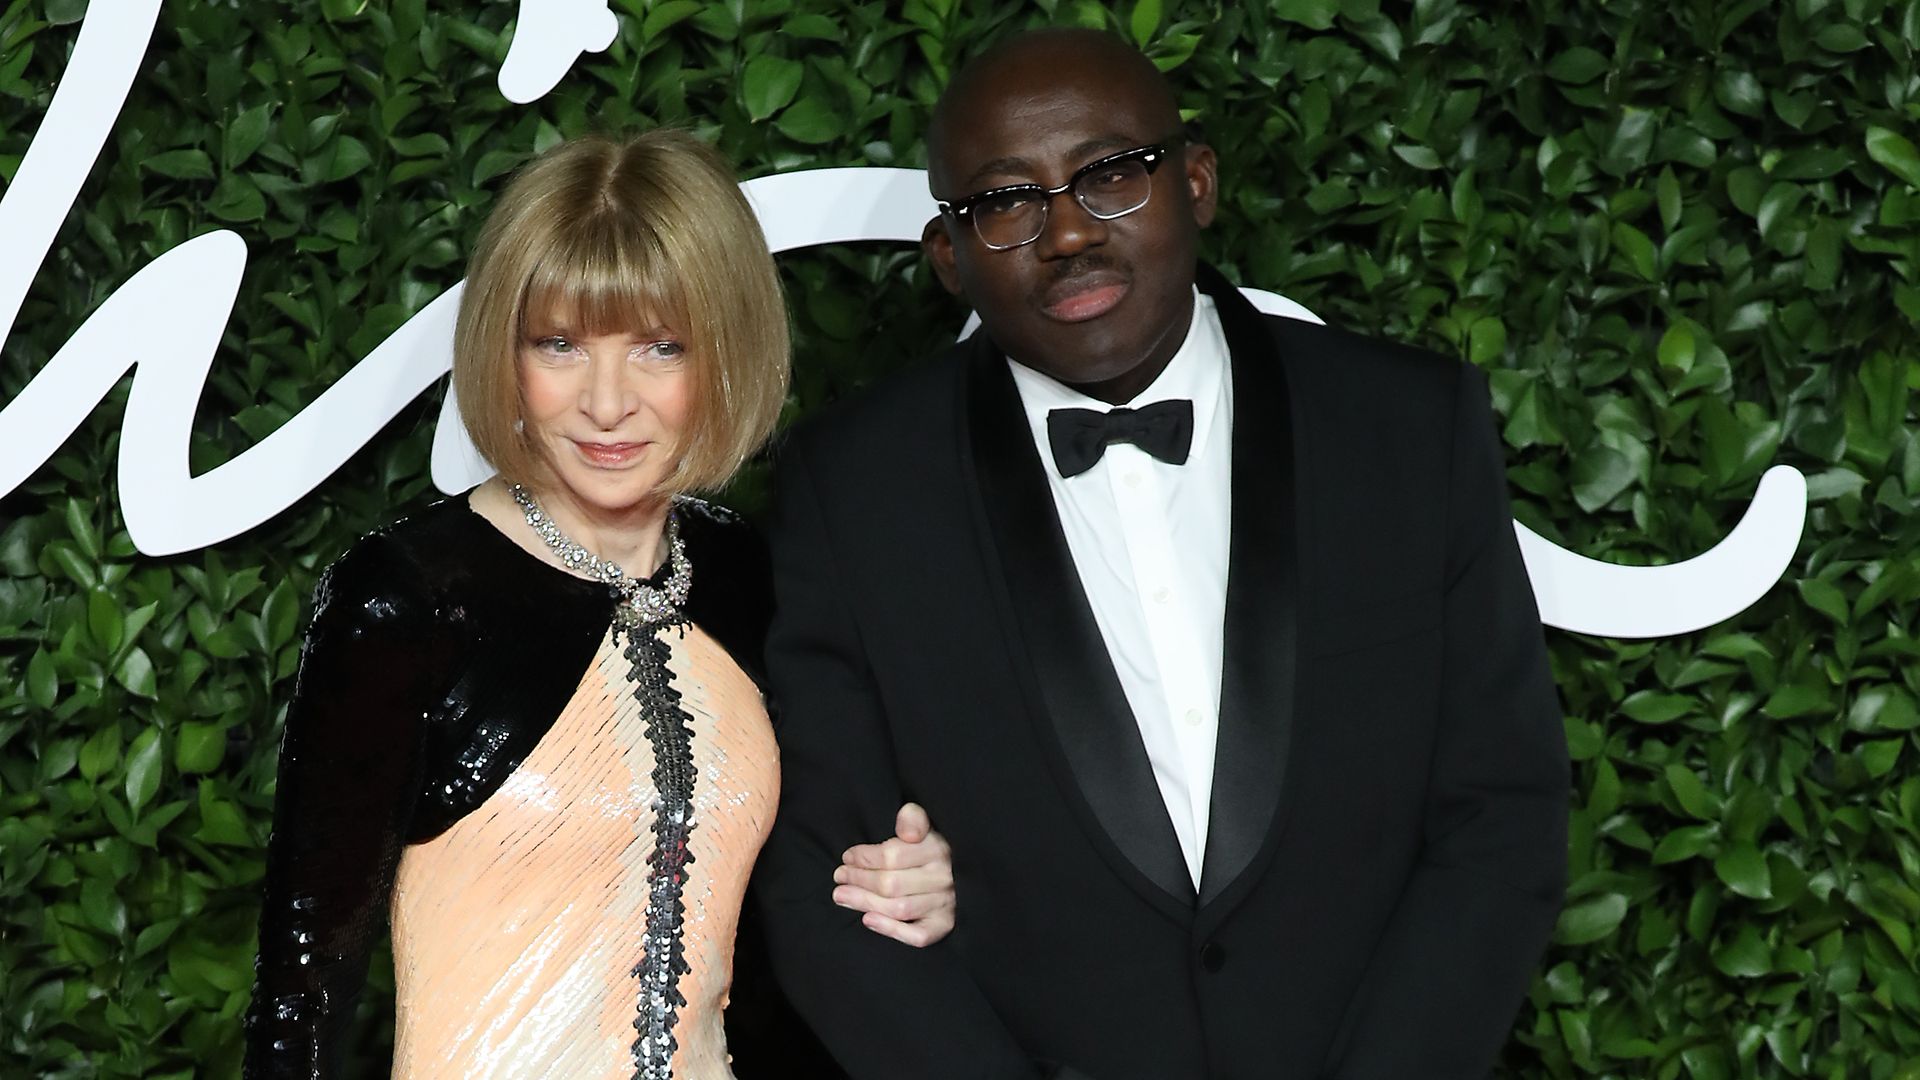 LONDON, ENGLAND - DECEMBER 02: Anna Wintour and Edward Ennniful arrive at The Fashion Awards 2019 held at Royal Albert Hall on December 02, 2019 in London, England. (Photo by Neil Mockford/FilmMagic)